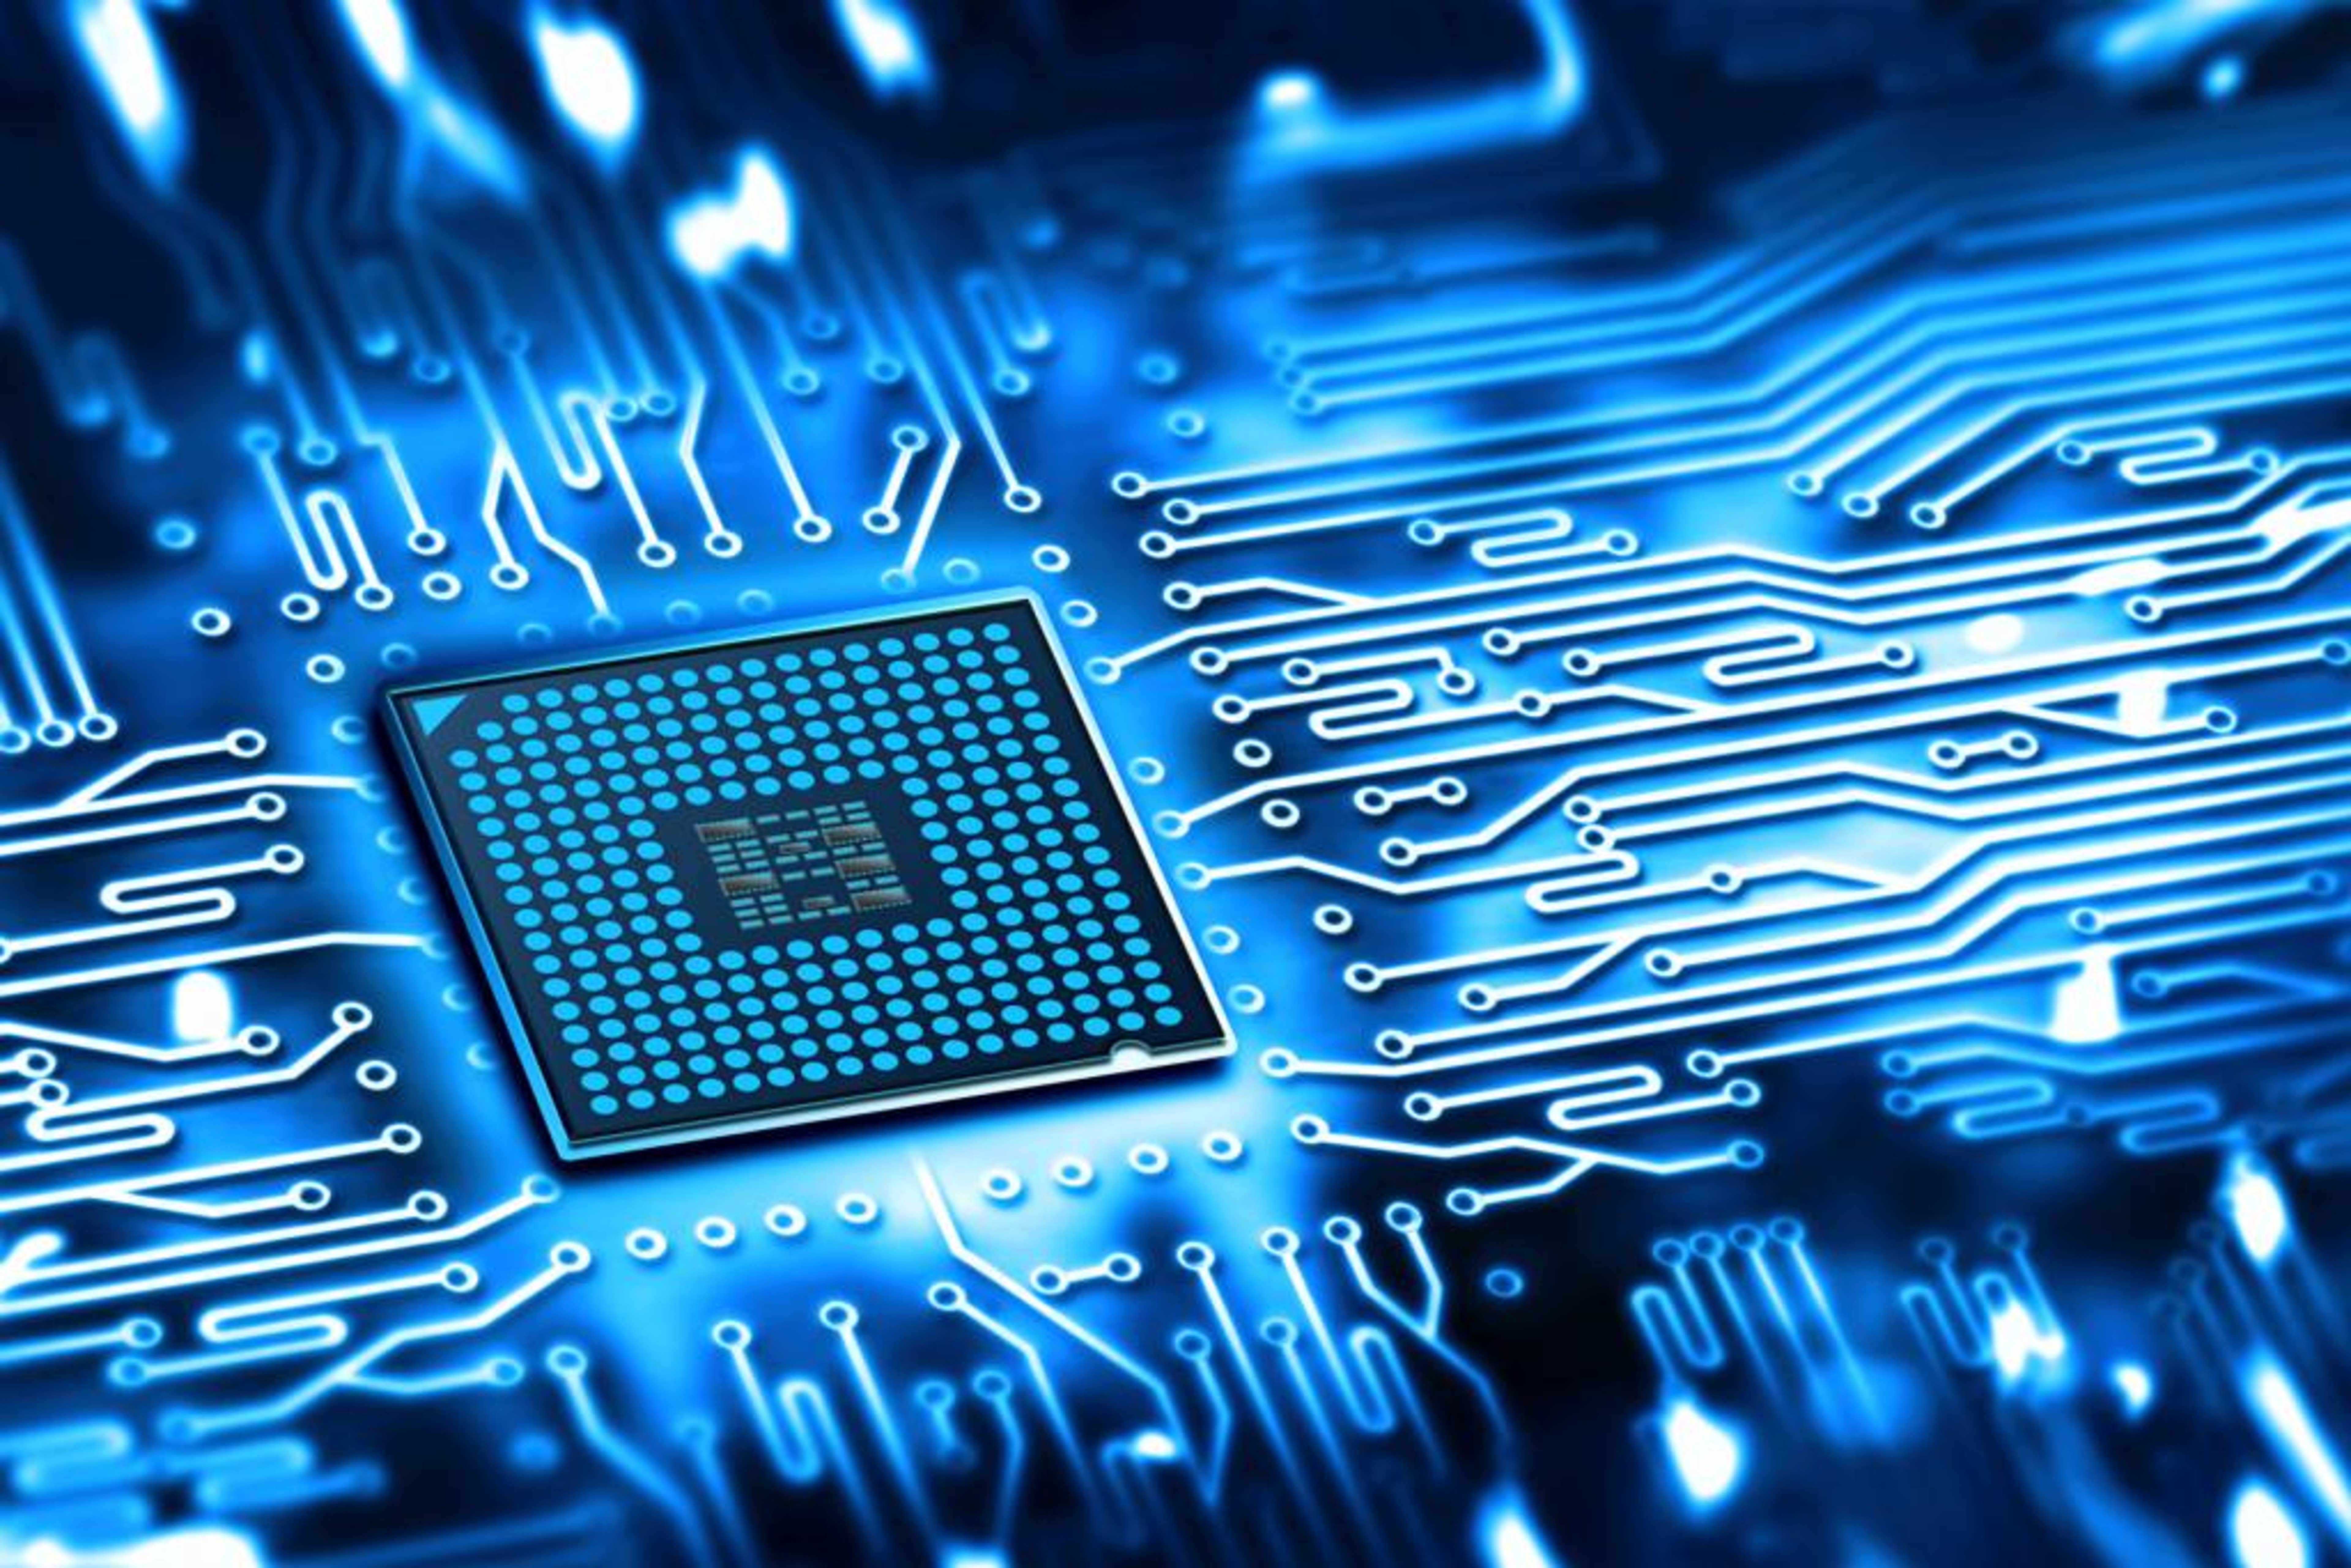 Why Longbow Research Upgrades Microchip Technology and Texas Instruments Stocks